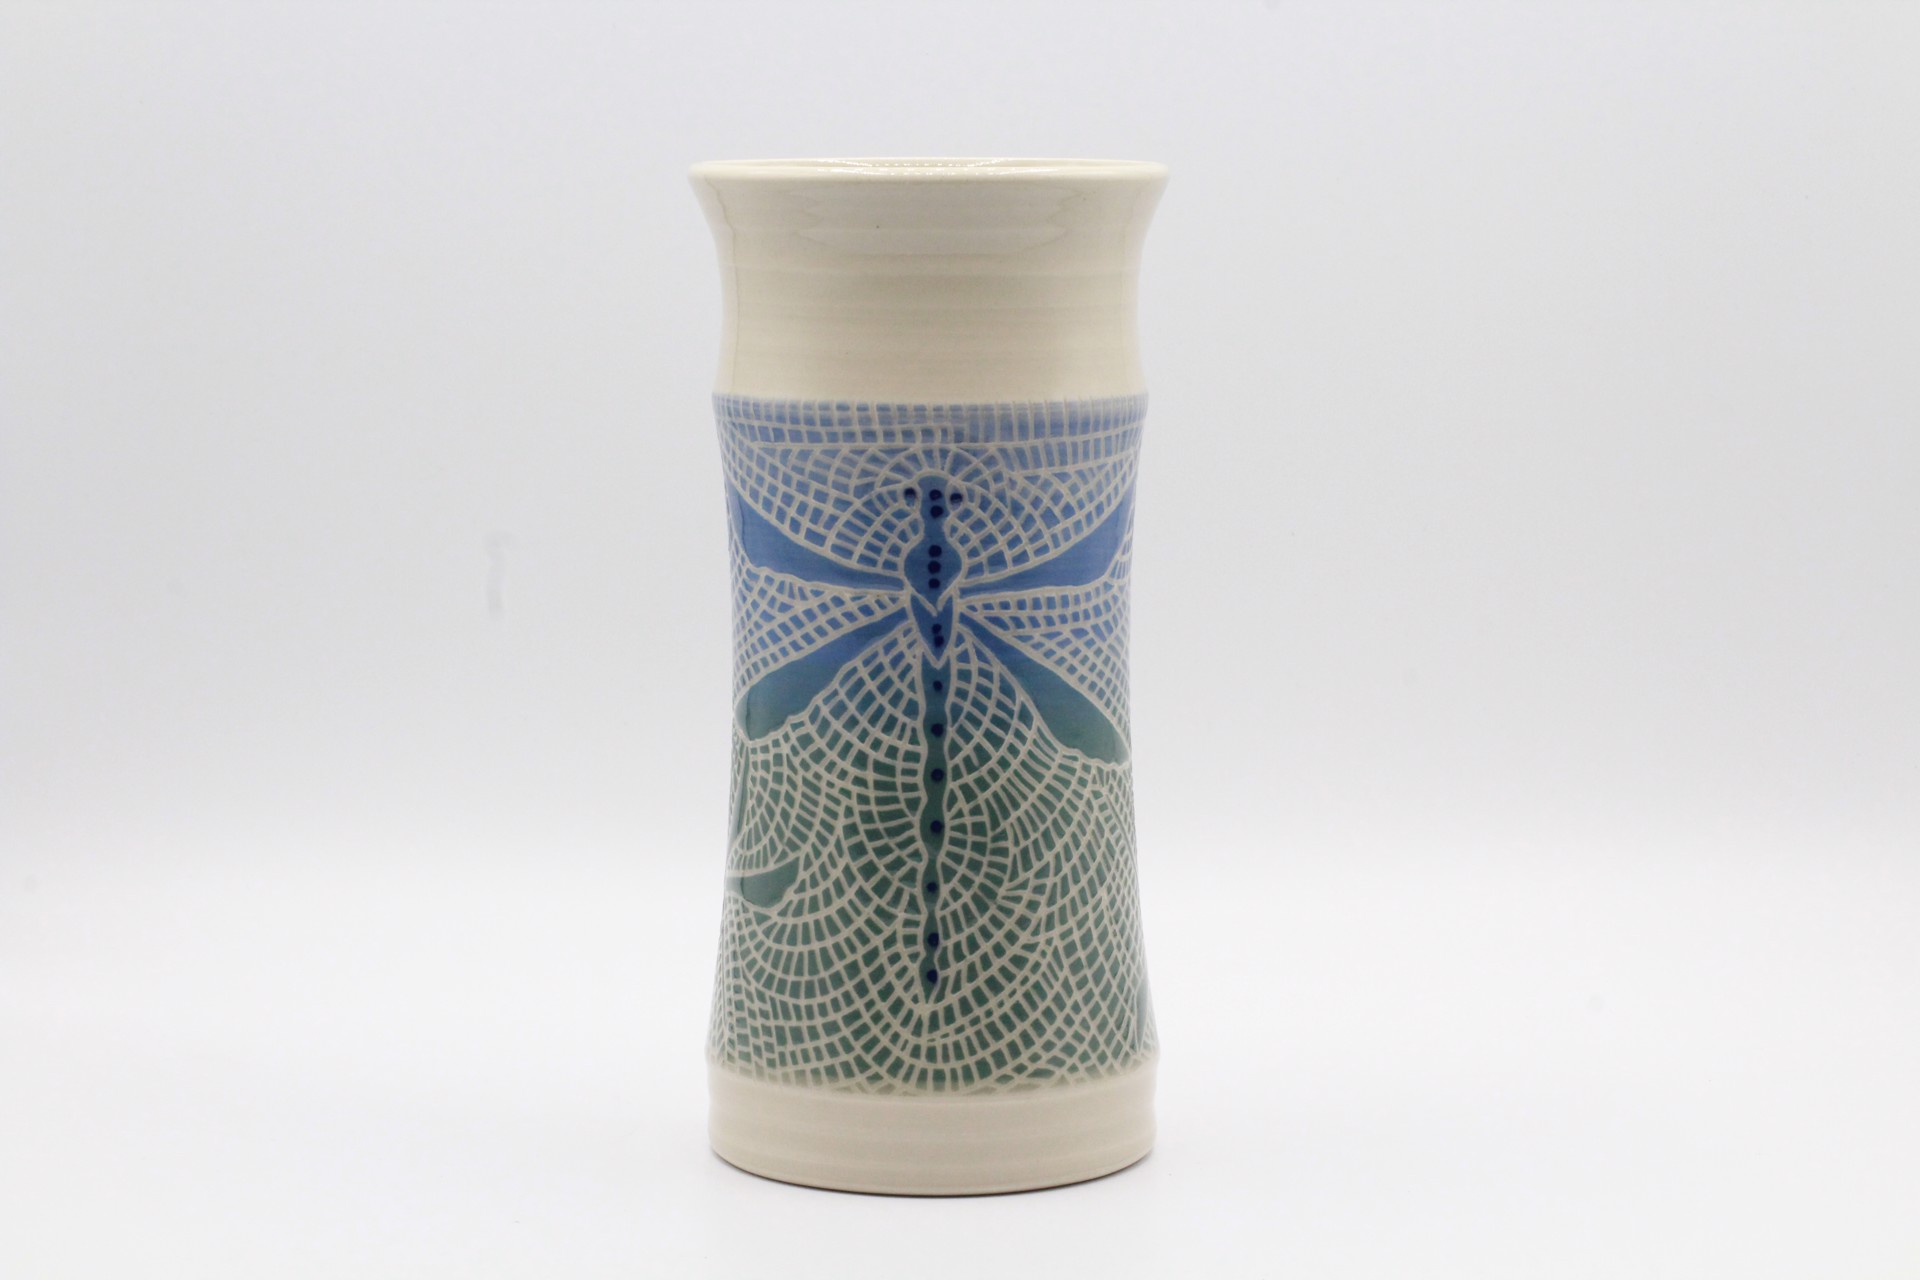 Dragonfly Sgraffito Large Vase by Kelly Price